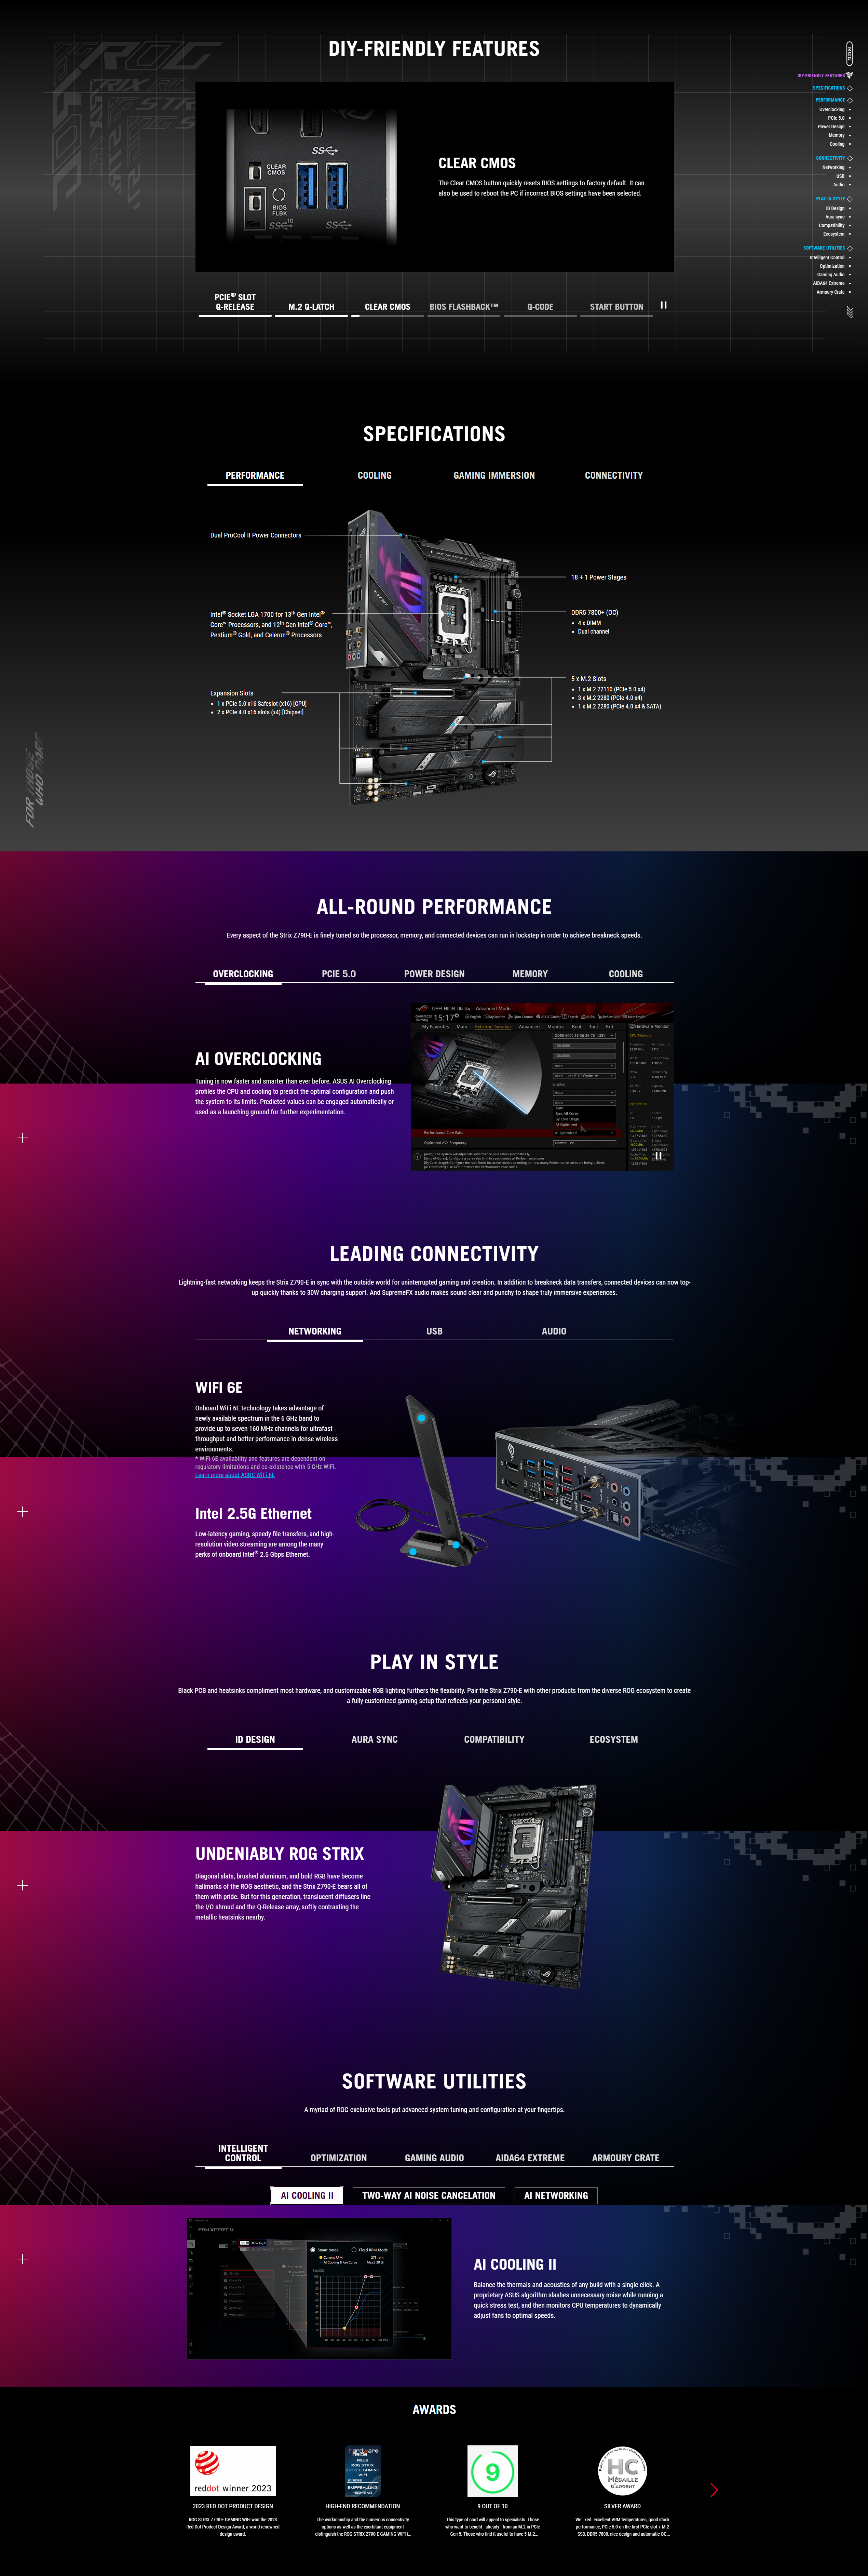 A large marketing image providing additional information about the product ASUS ROG Strix Z790-E Gaming WiFi II LGA1700 ATX Desktop Motherboard - Additional alt info not provided